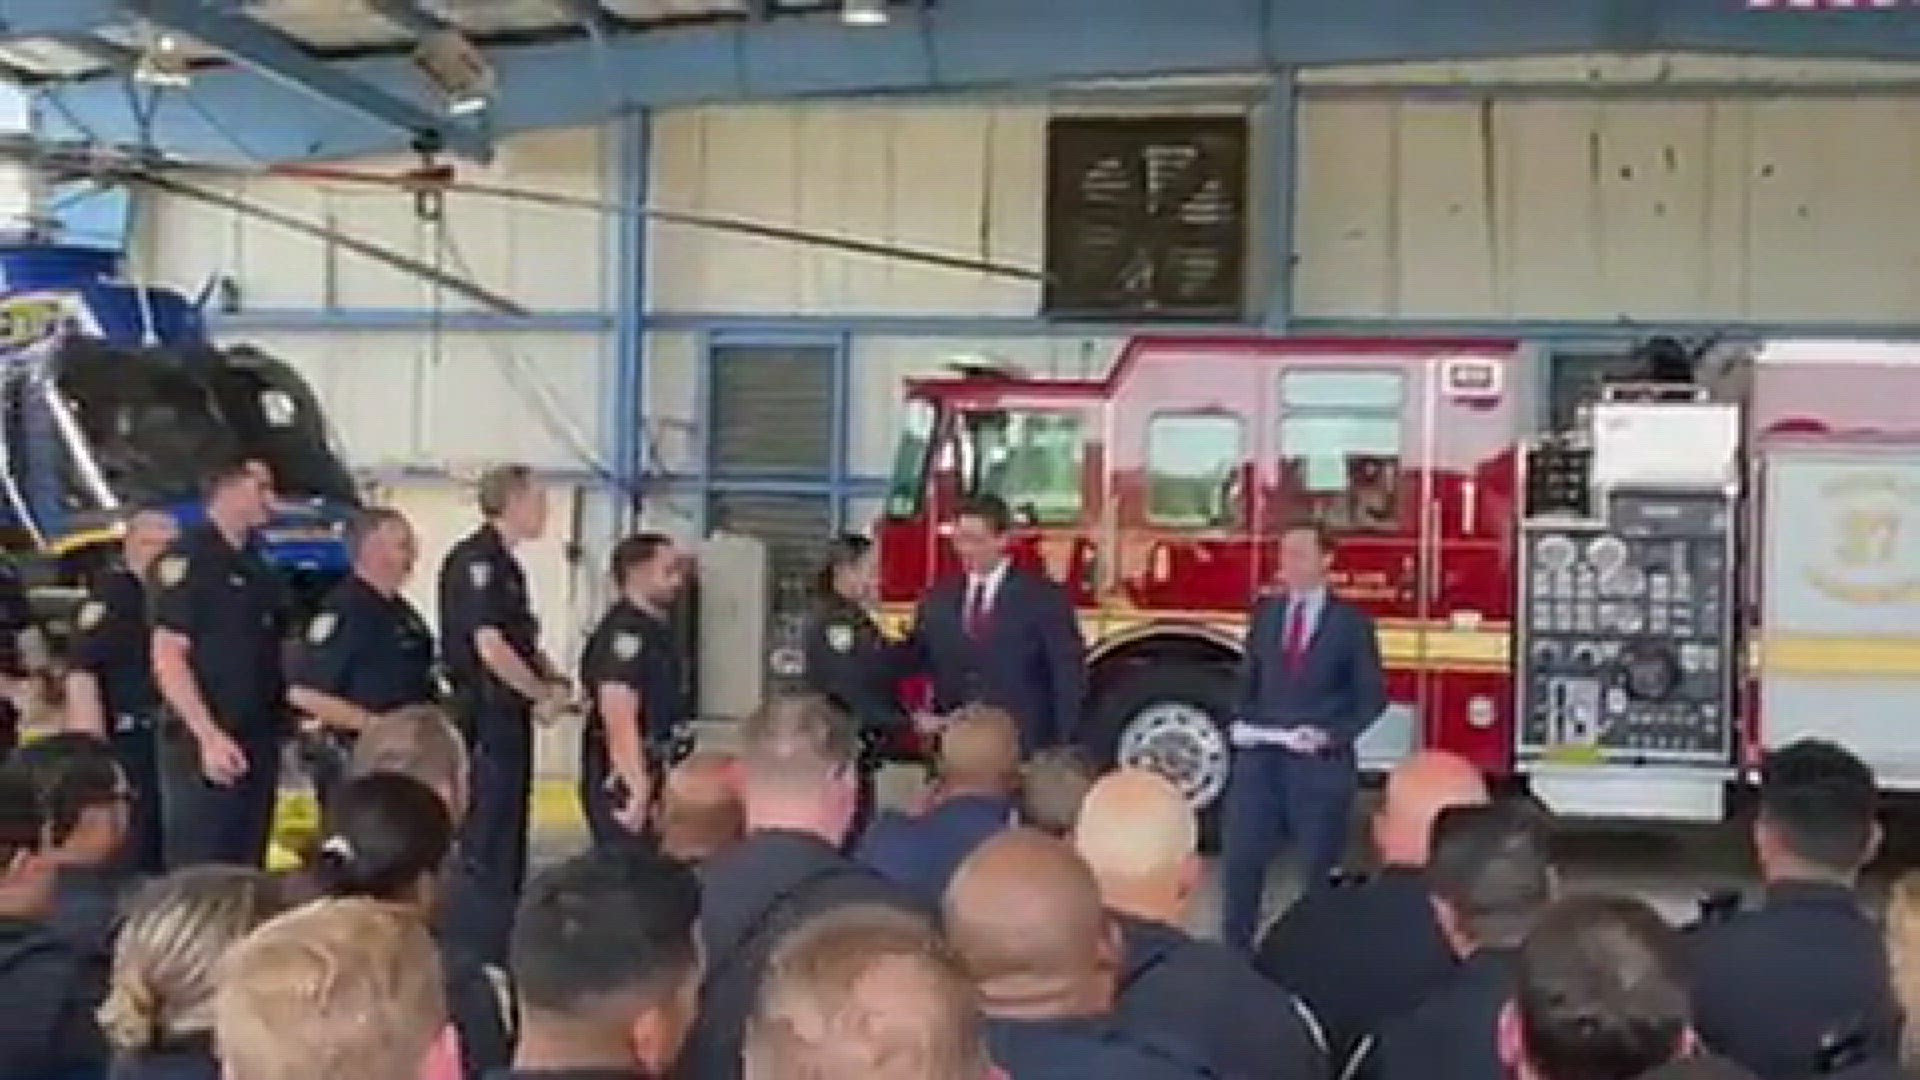 Gov. DeSantis hands out bonuses to Jacksonville first responders during press conference Monday afternoon.
Credit: Atyia Collins